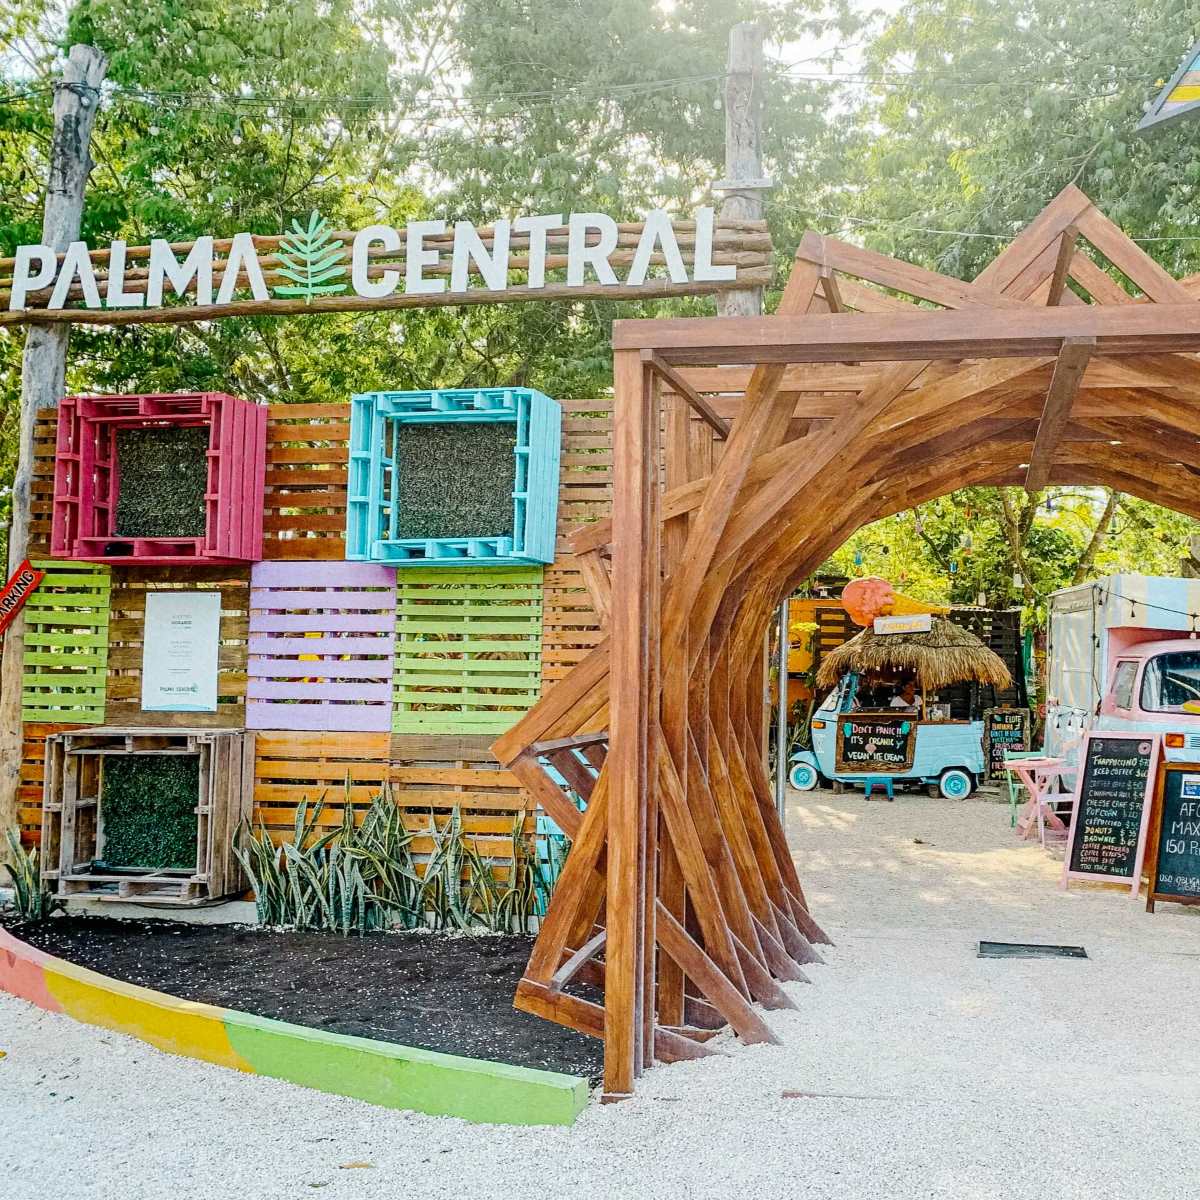 The entrance to Palma Central food truck park.